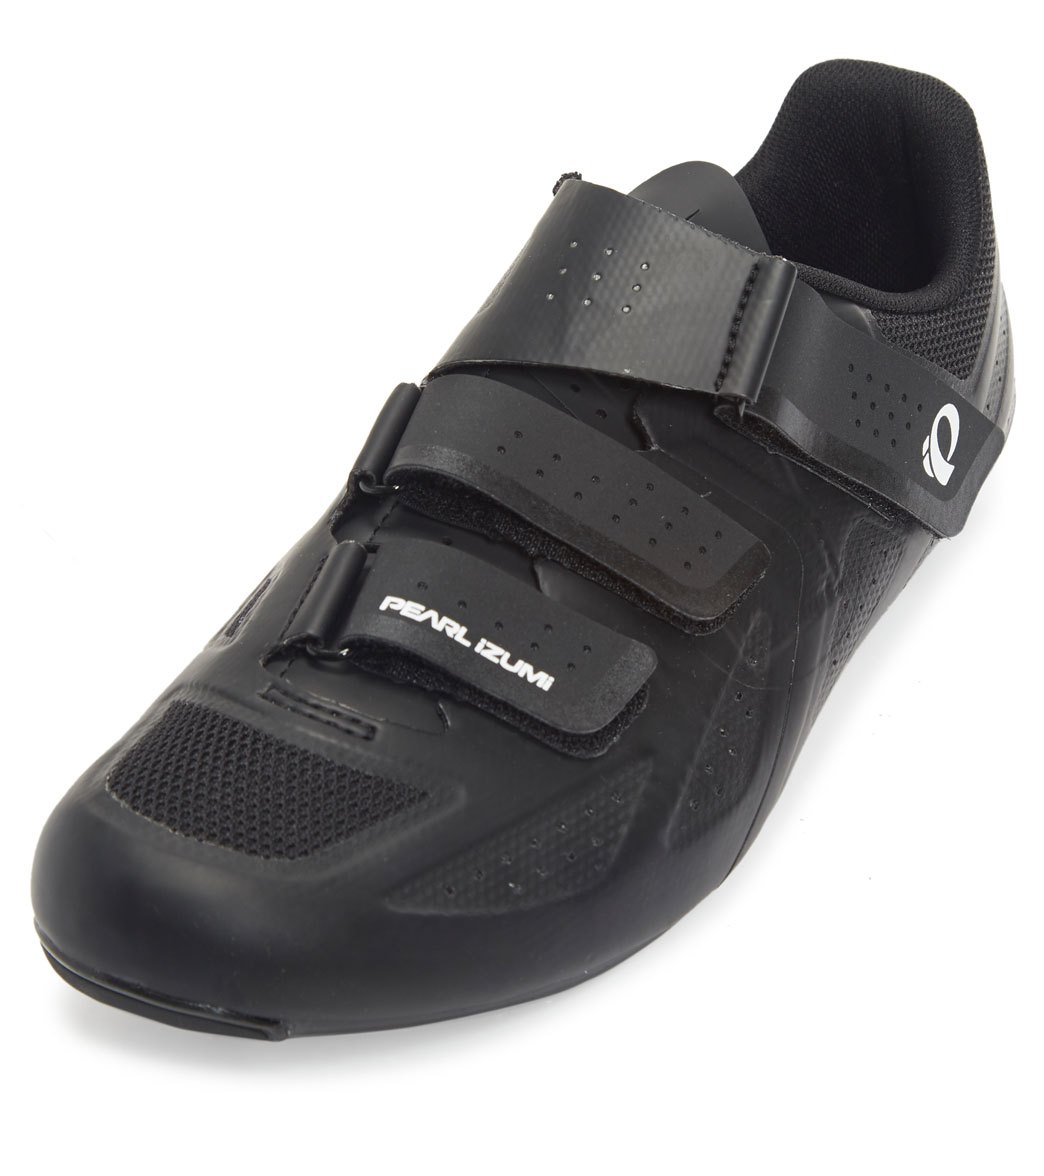 pearl izumi spin shoes